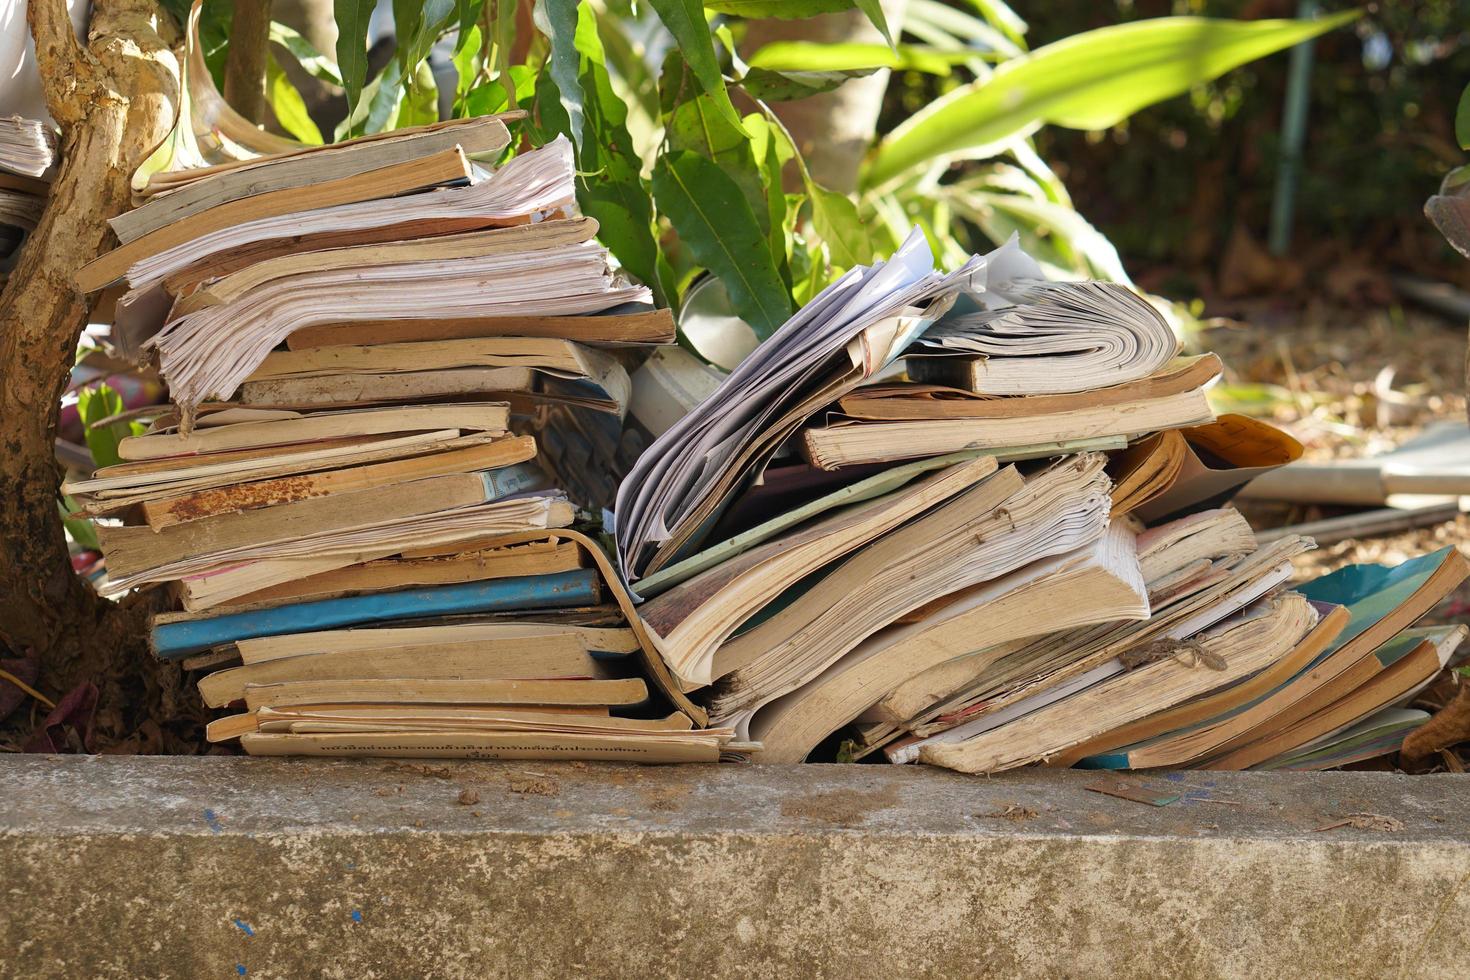 Stacks of old papers and books waiting to be recycled. photo